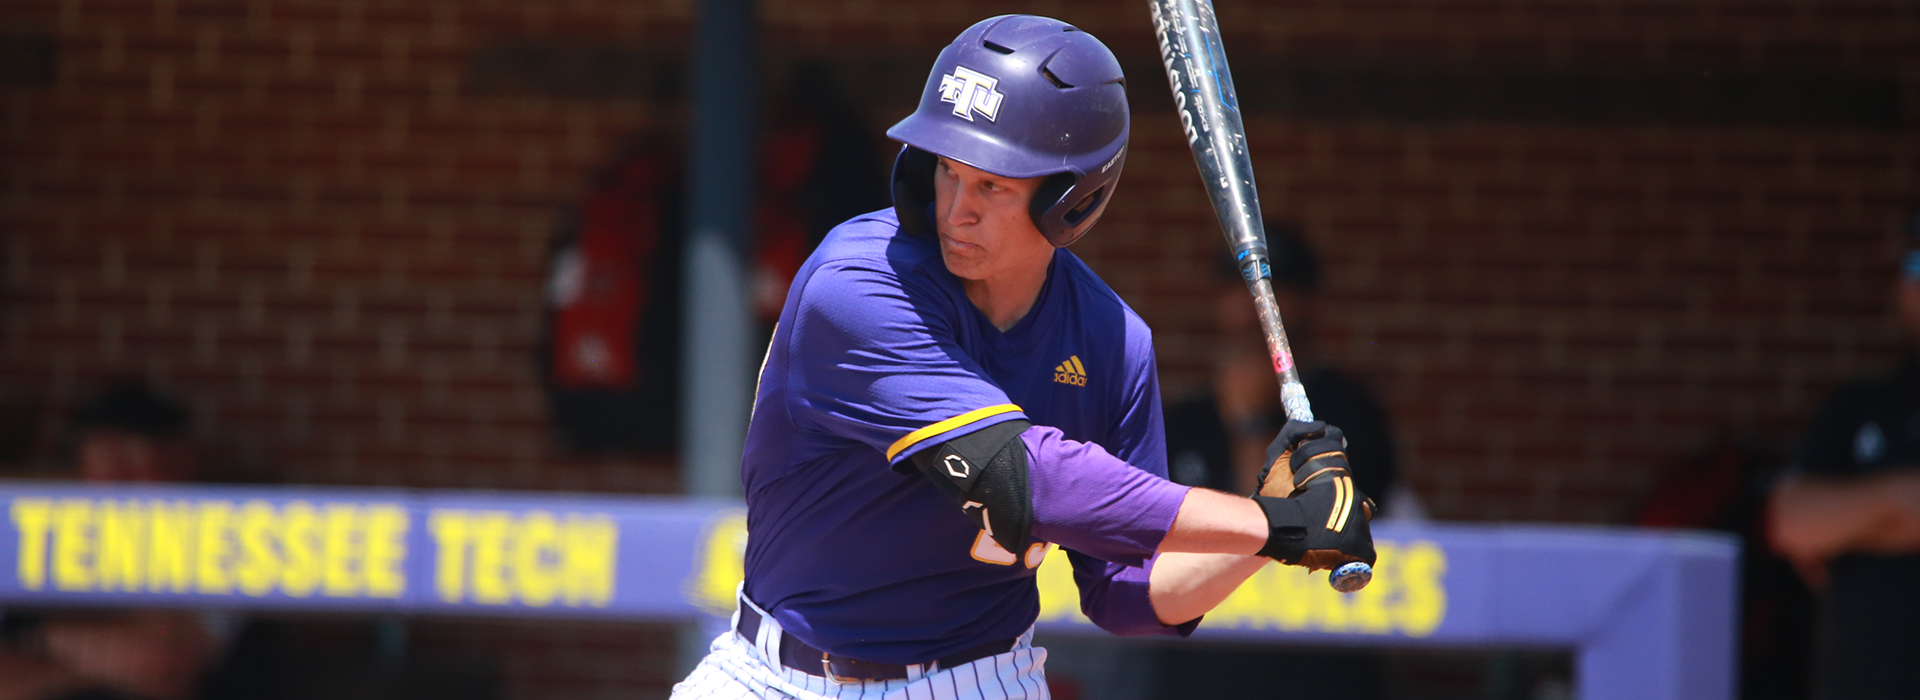 Littlejohn recognized as OVC Player of the Week, Collegiate Baseball National Player of the Week